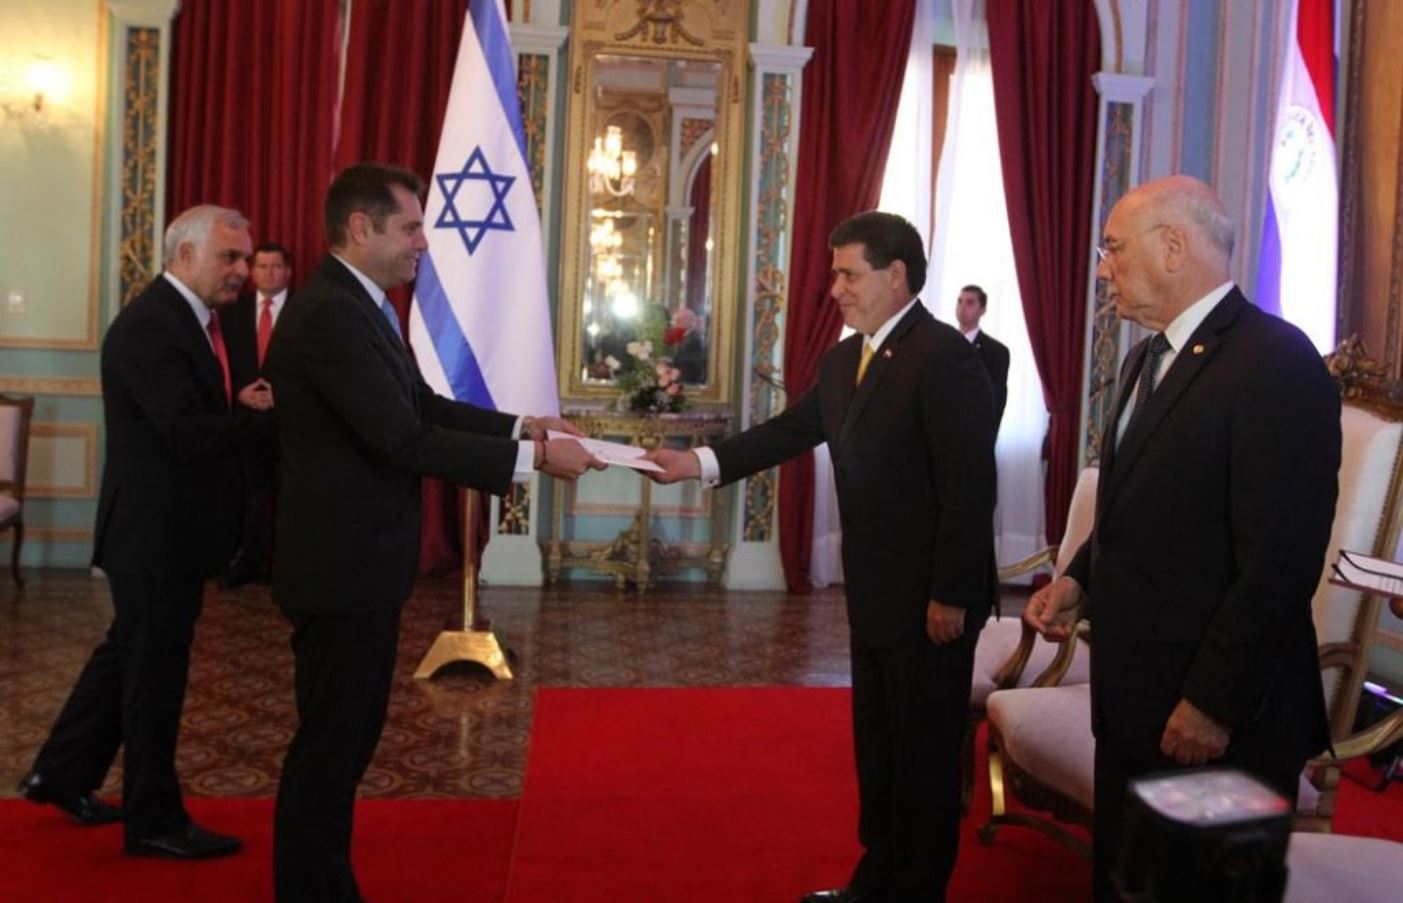 Israeli ambassador to Paraguay Peleg Lewi submitting the charter to reopen the Israeli embassy to President Horacio Cartes on July 27, 2015. Photo courtesy of Dirrección de Informática/SICOM Paraguay